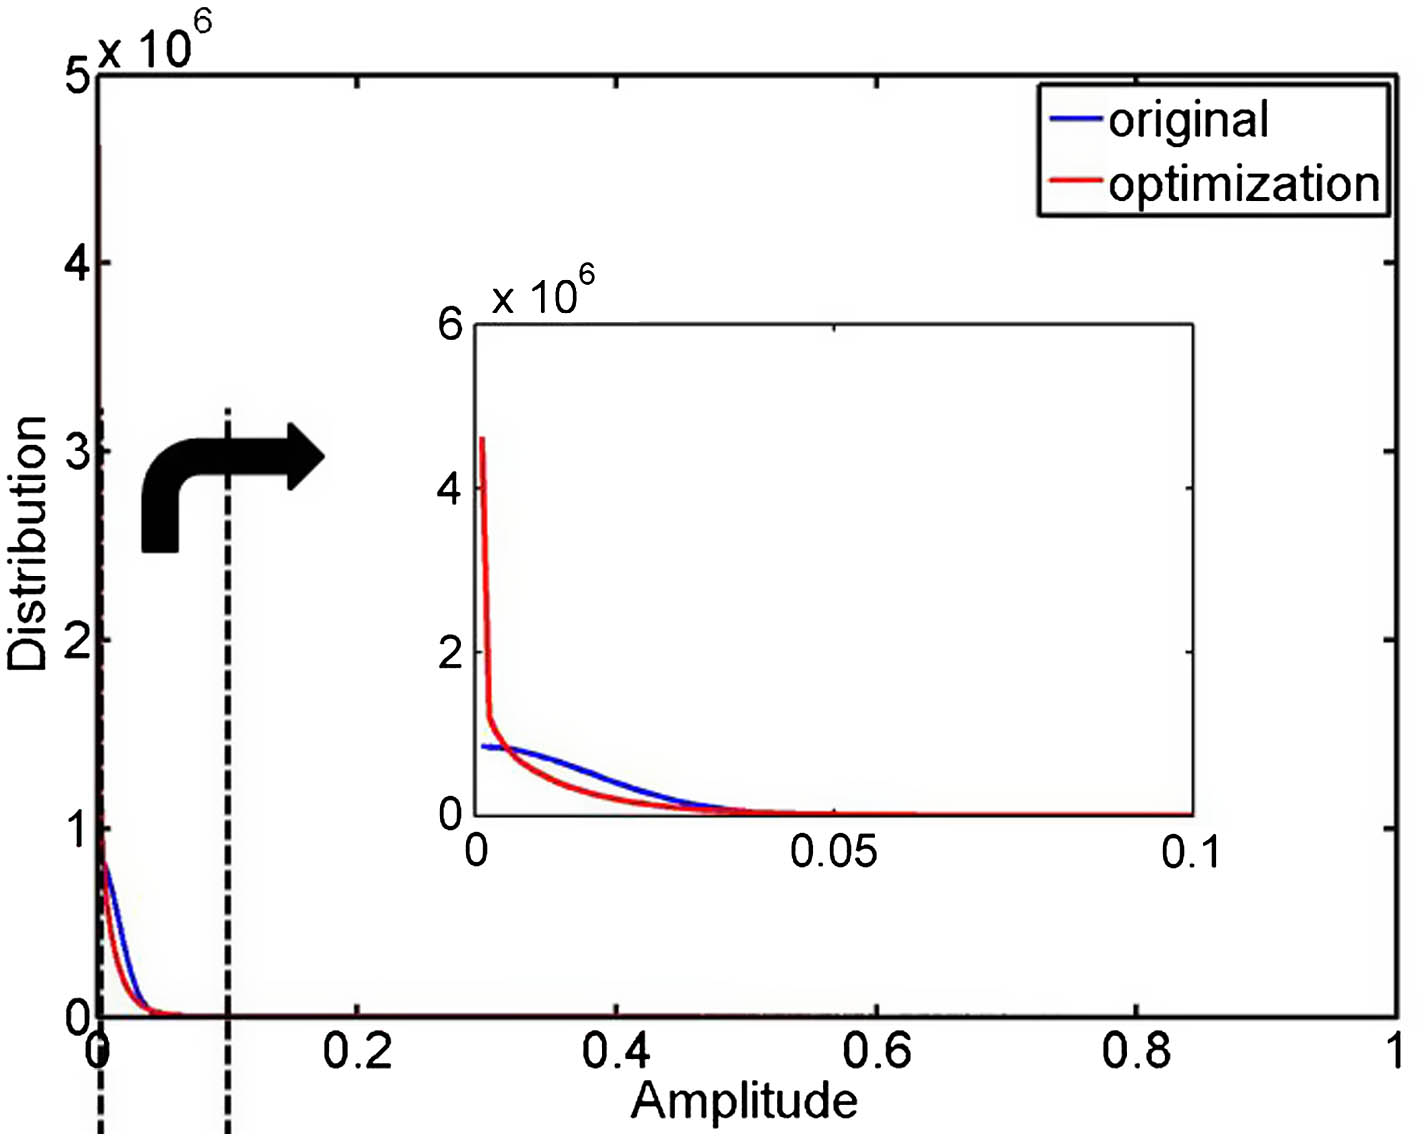 Distributions of μij of the original matrix Dinit (blue line) and the optimized matrix Dopt (red line). Coherence μij of Dopt are concentrated in the region with smaller coherence values if compared with that of Dinit.